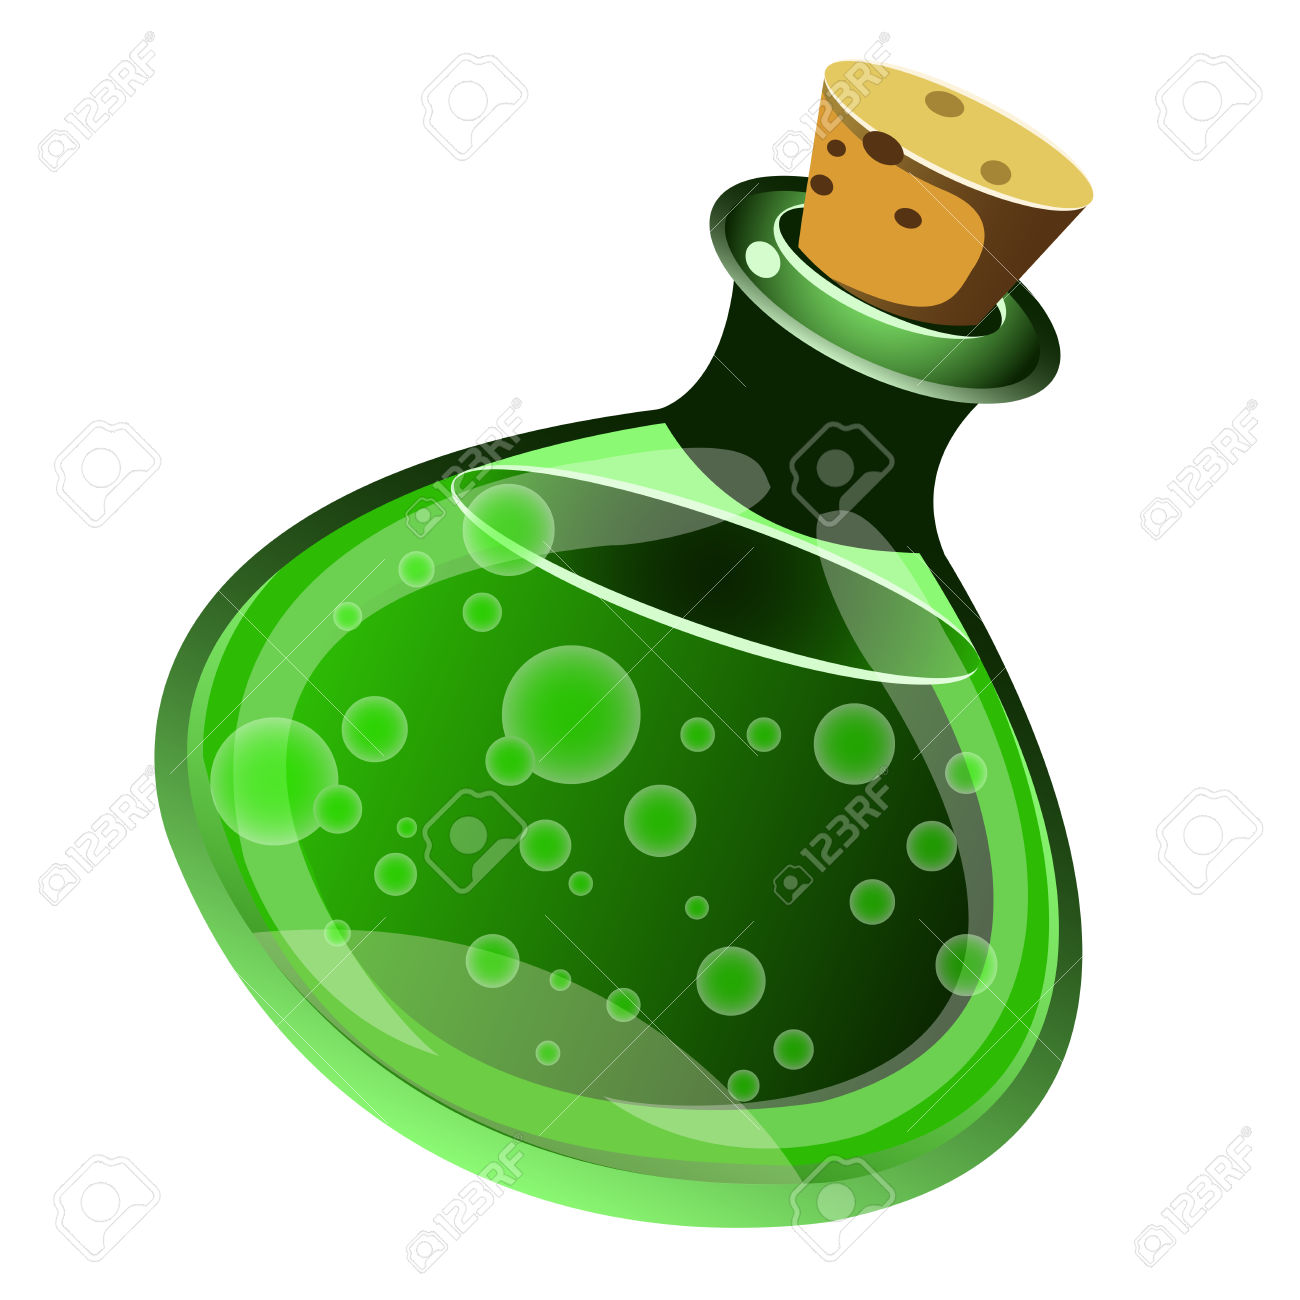 Magic Drink In A Bottle On White Background Royalty Free Cliparts.